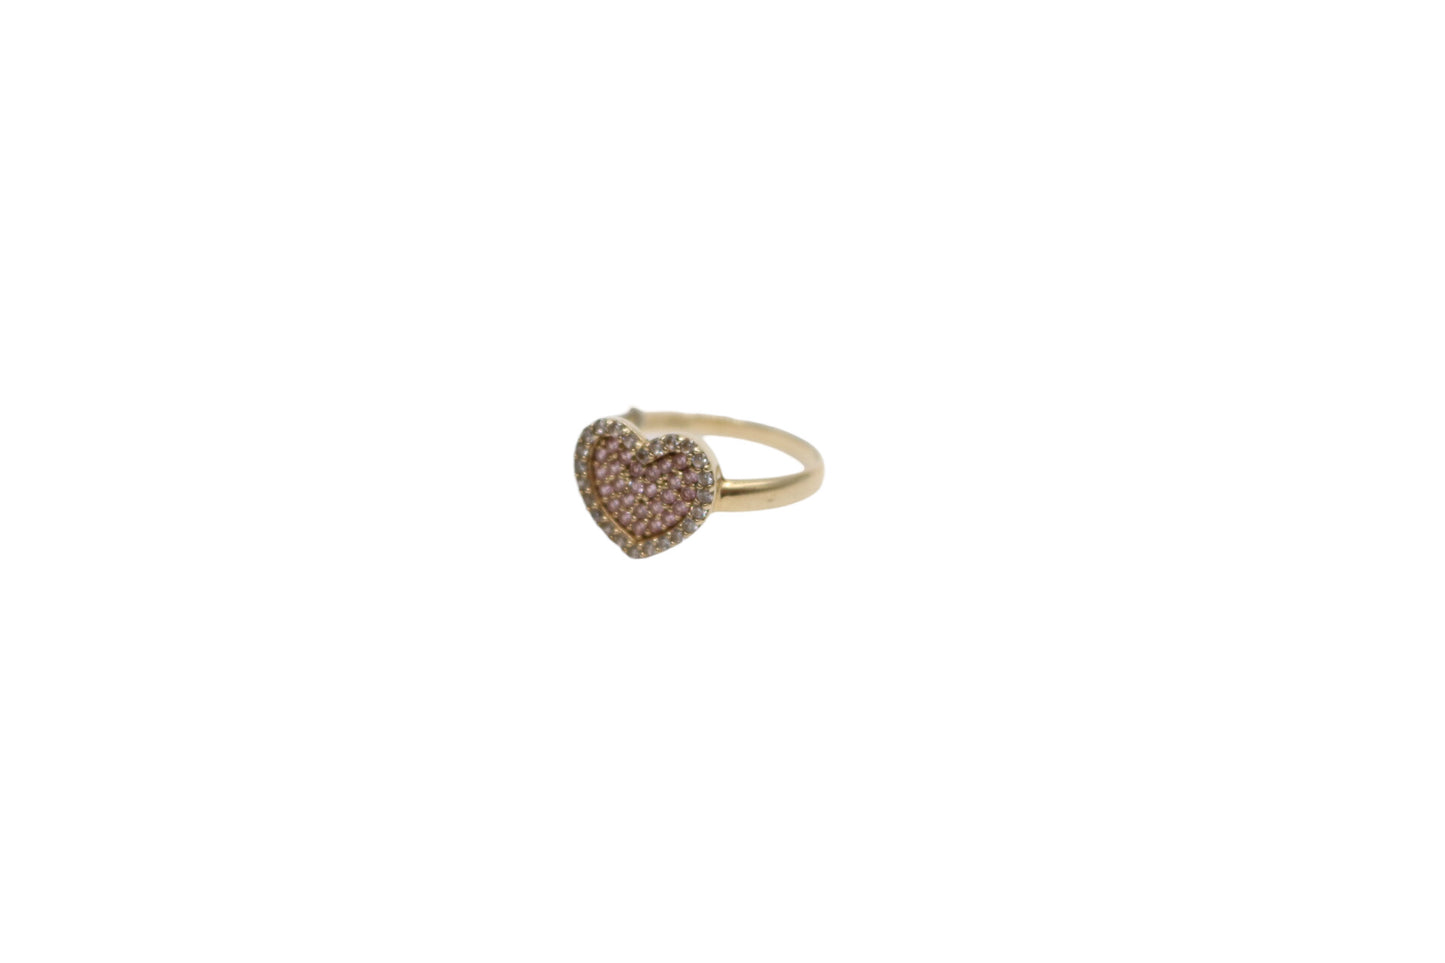 10K Yellow Gold Heart Ring w/Clear Stones (Size 7 1/4)